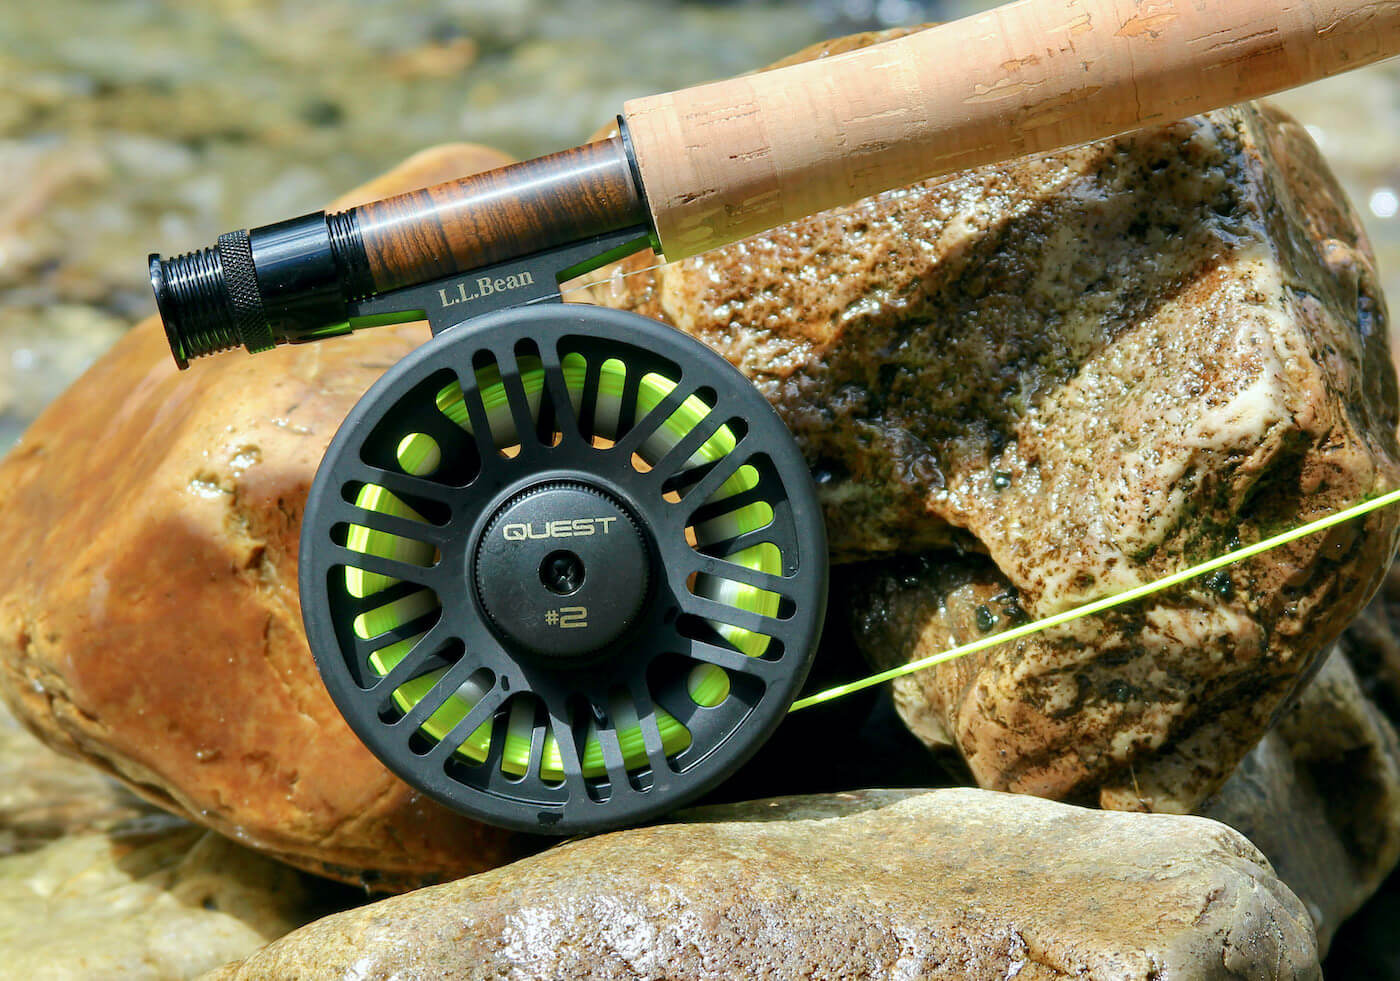 This photo shows the L.L.Bean Quest Fly Rod Outfit near a trout stream.